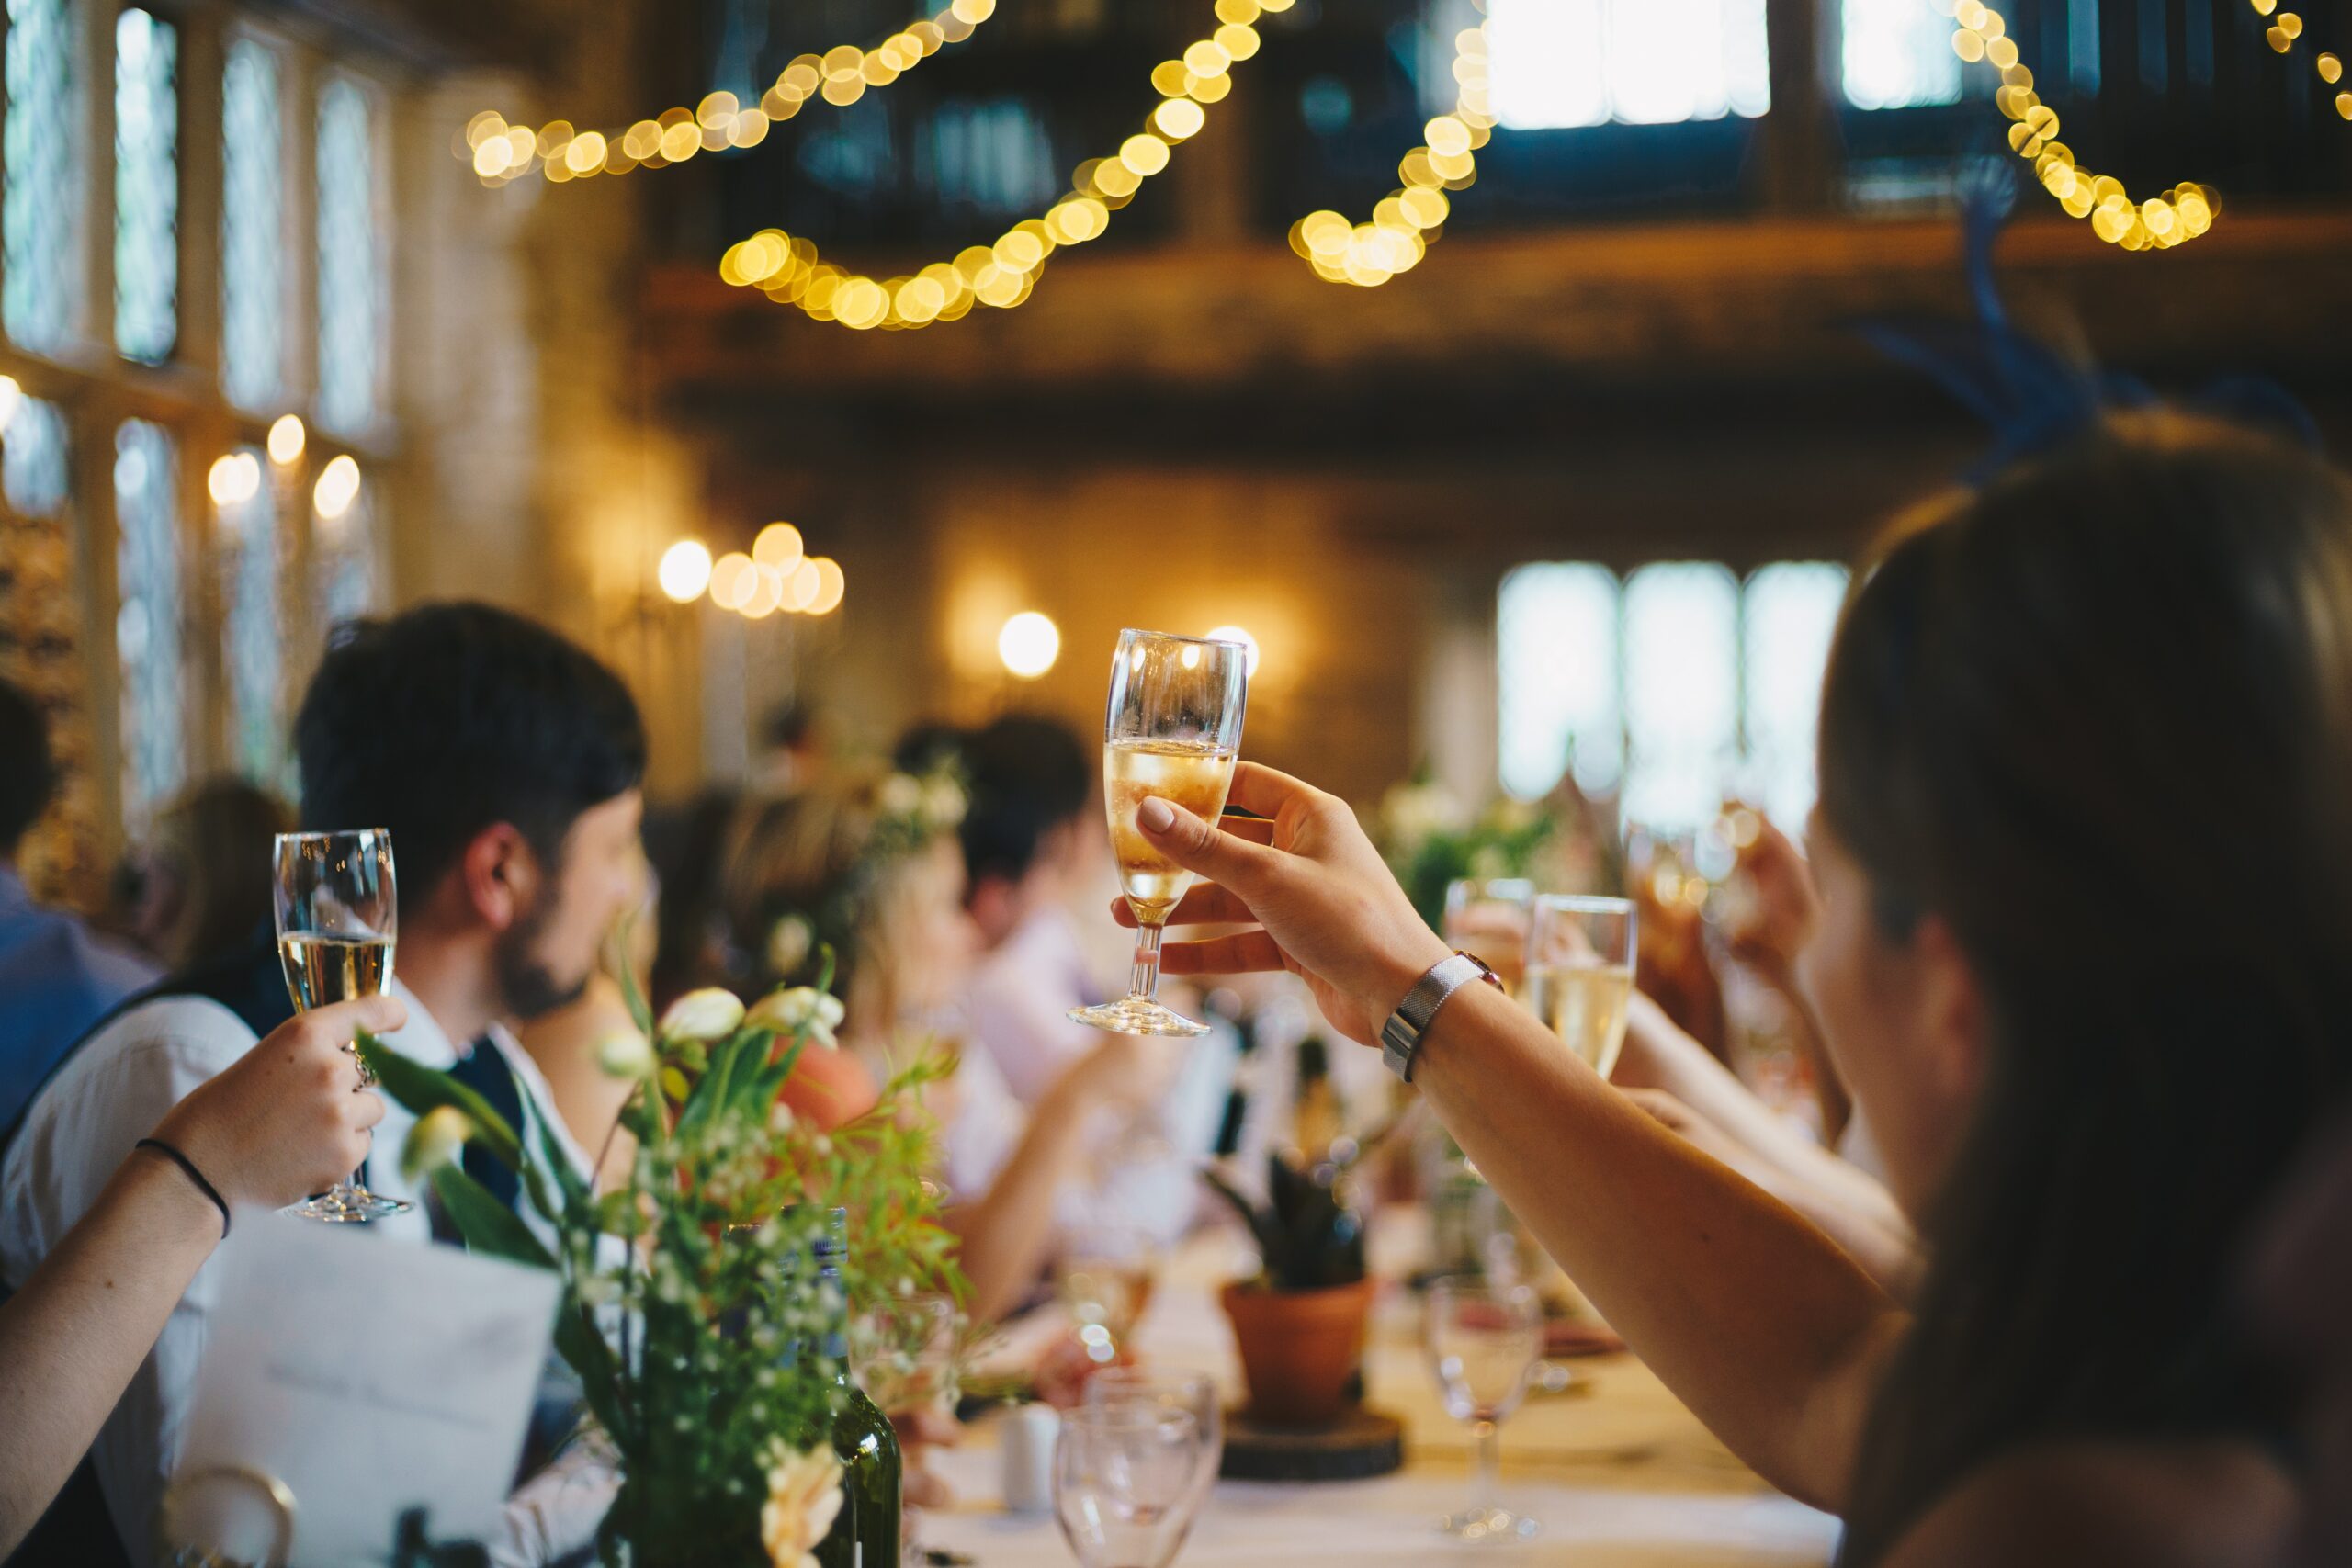 People lift their glasses in a joyful toast, celebrating a happy moment together.